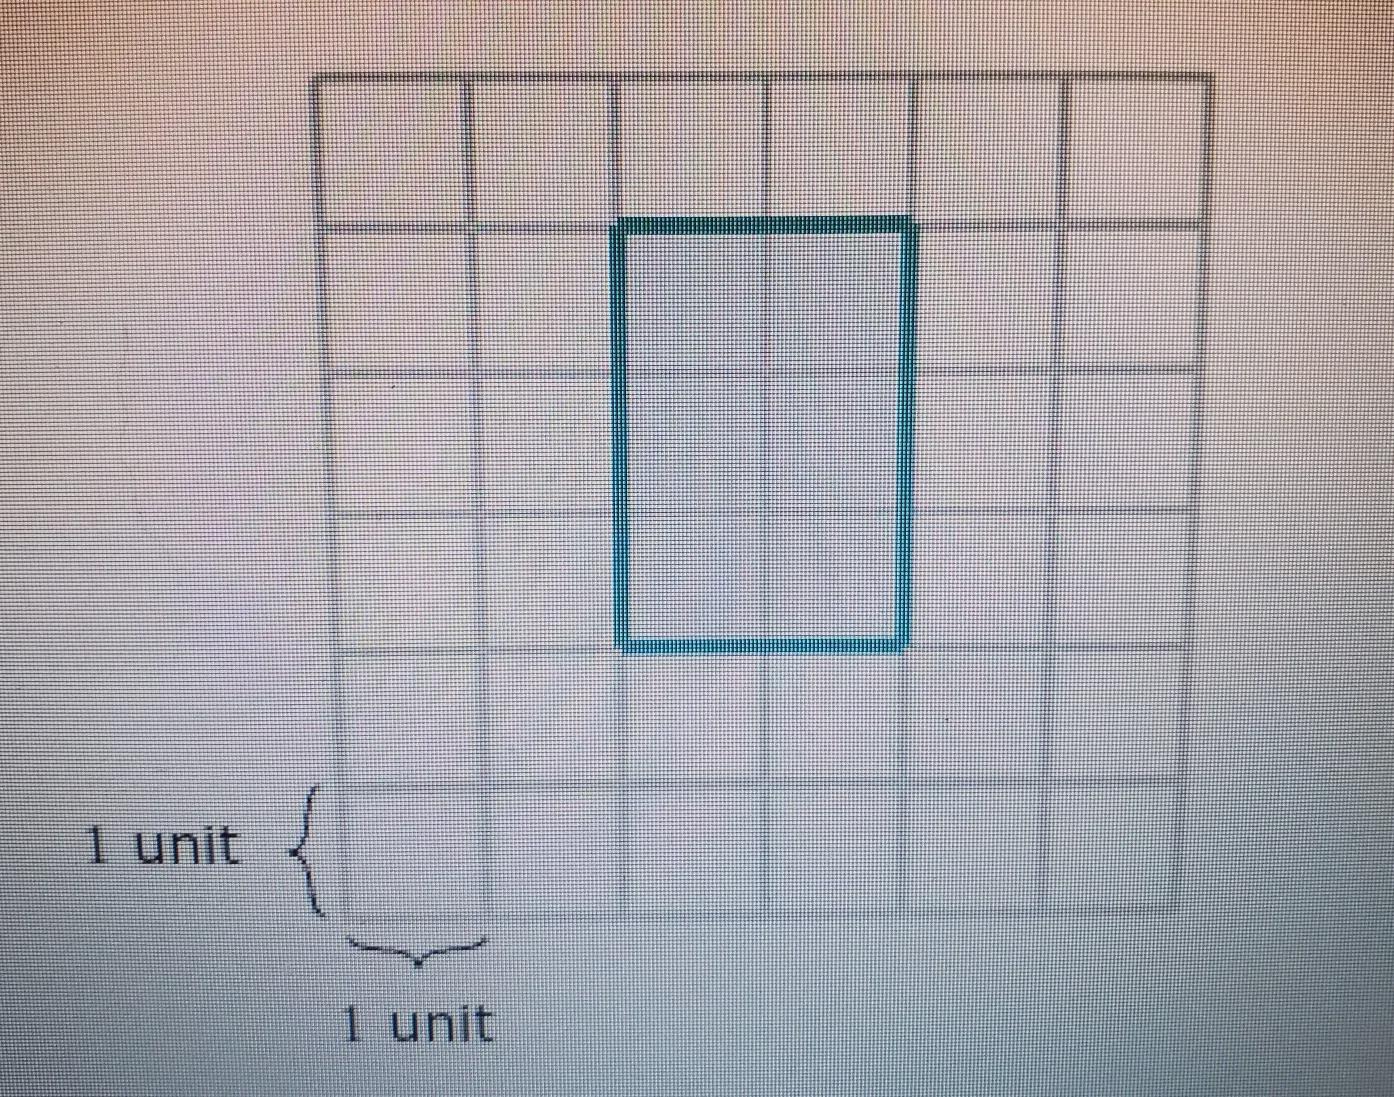 Find The Area And Perimeter Of The Shaded Figure Area = X Squre UnitsPerimeter = X Units